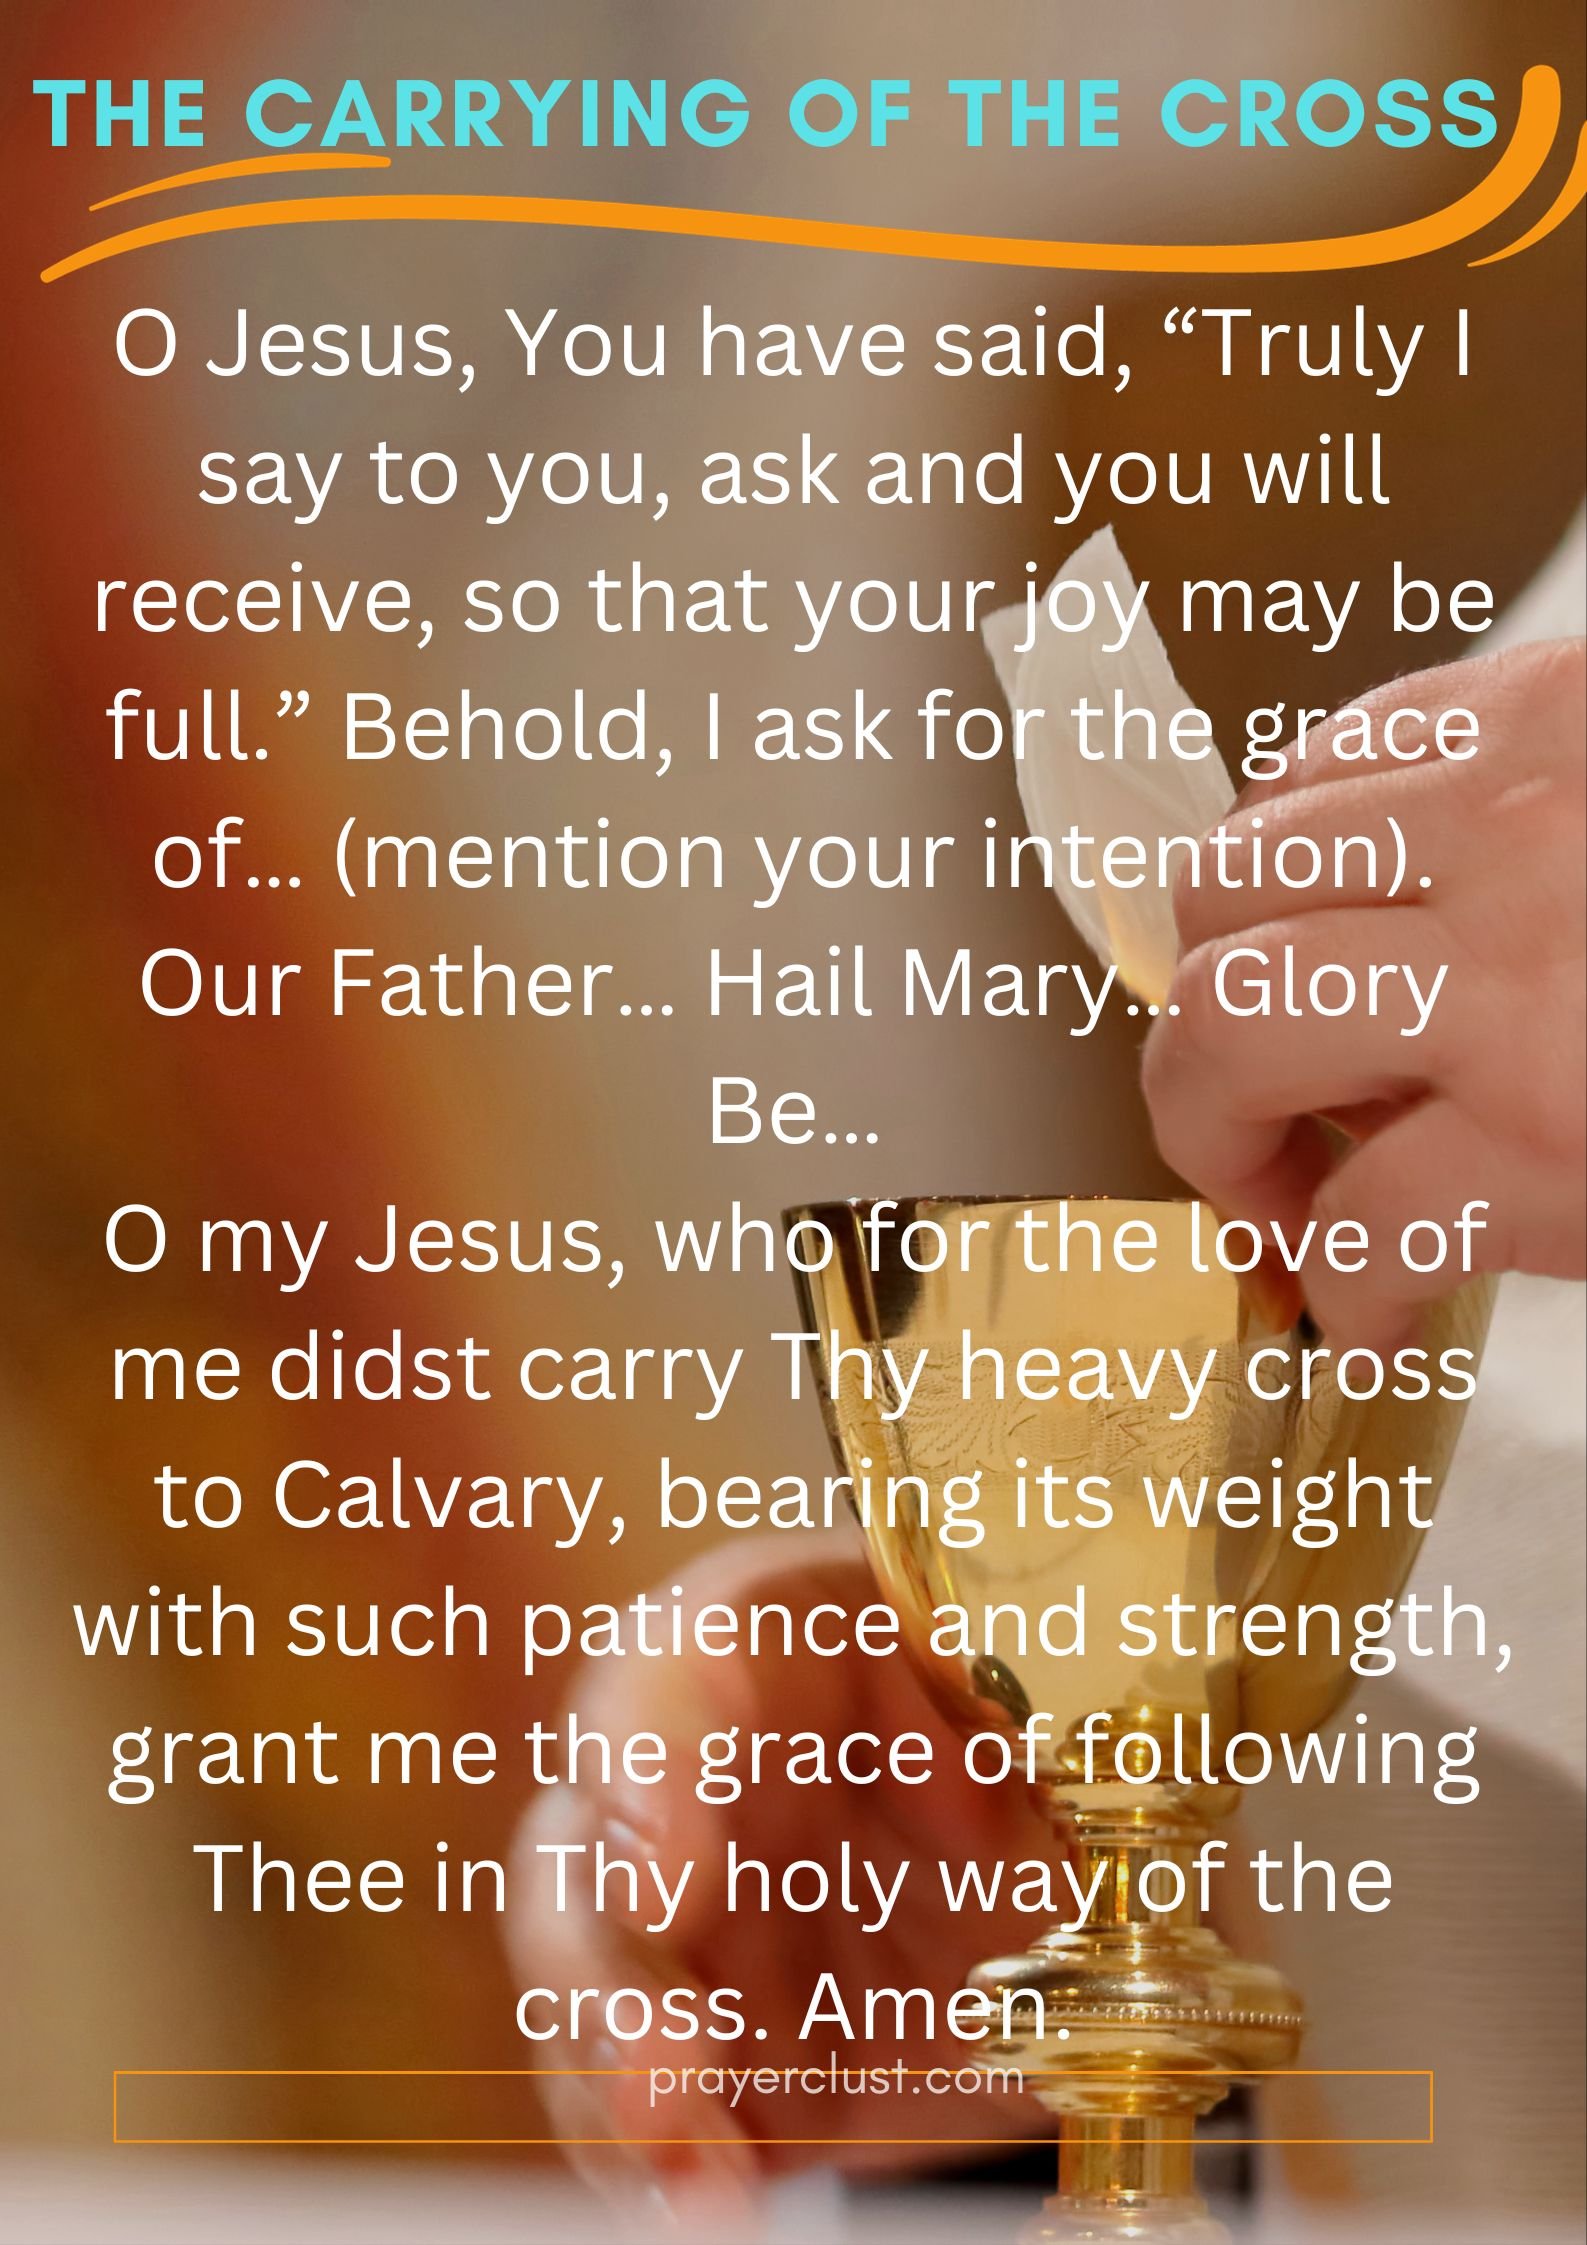 The Carrying of the Cross Prayer